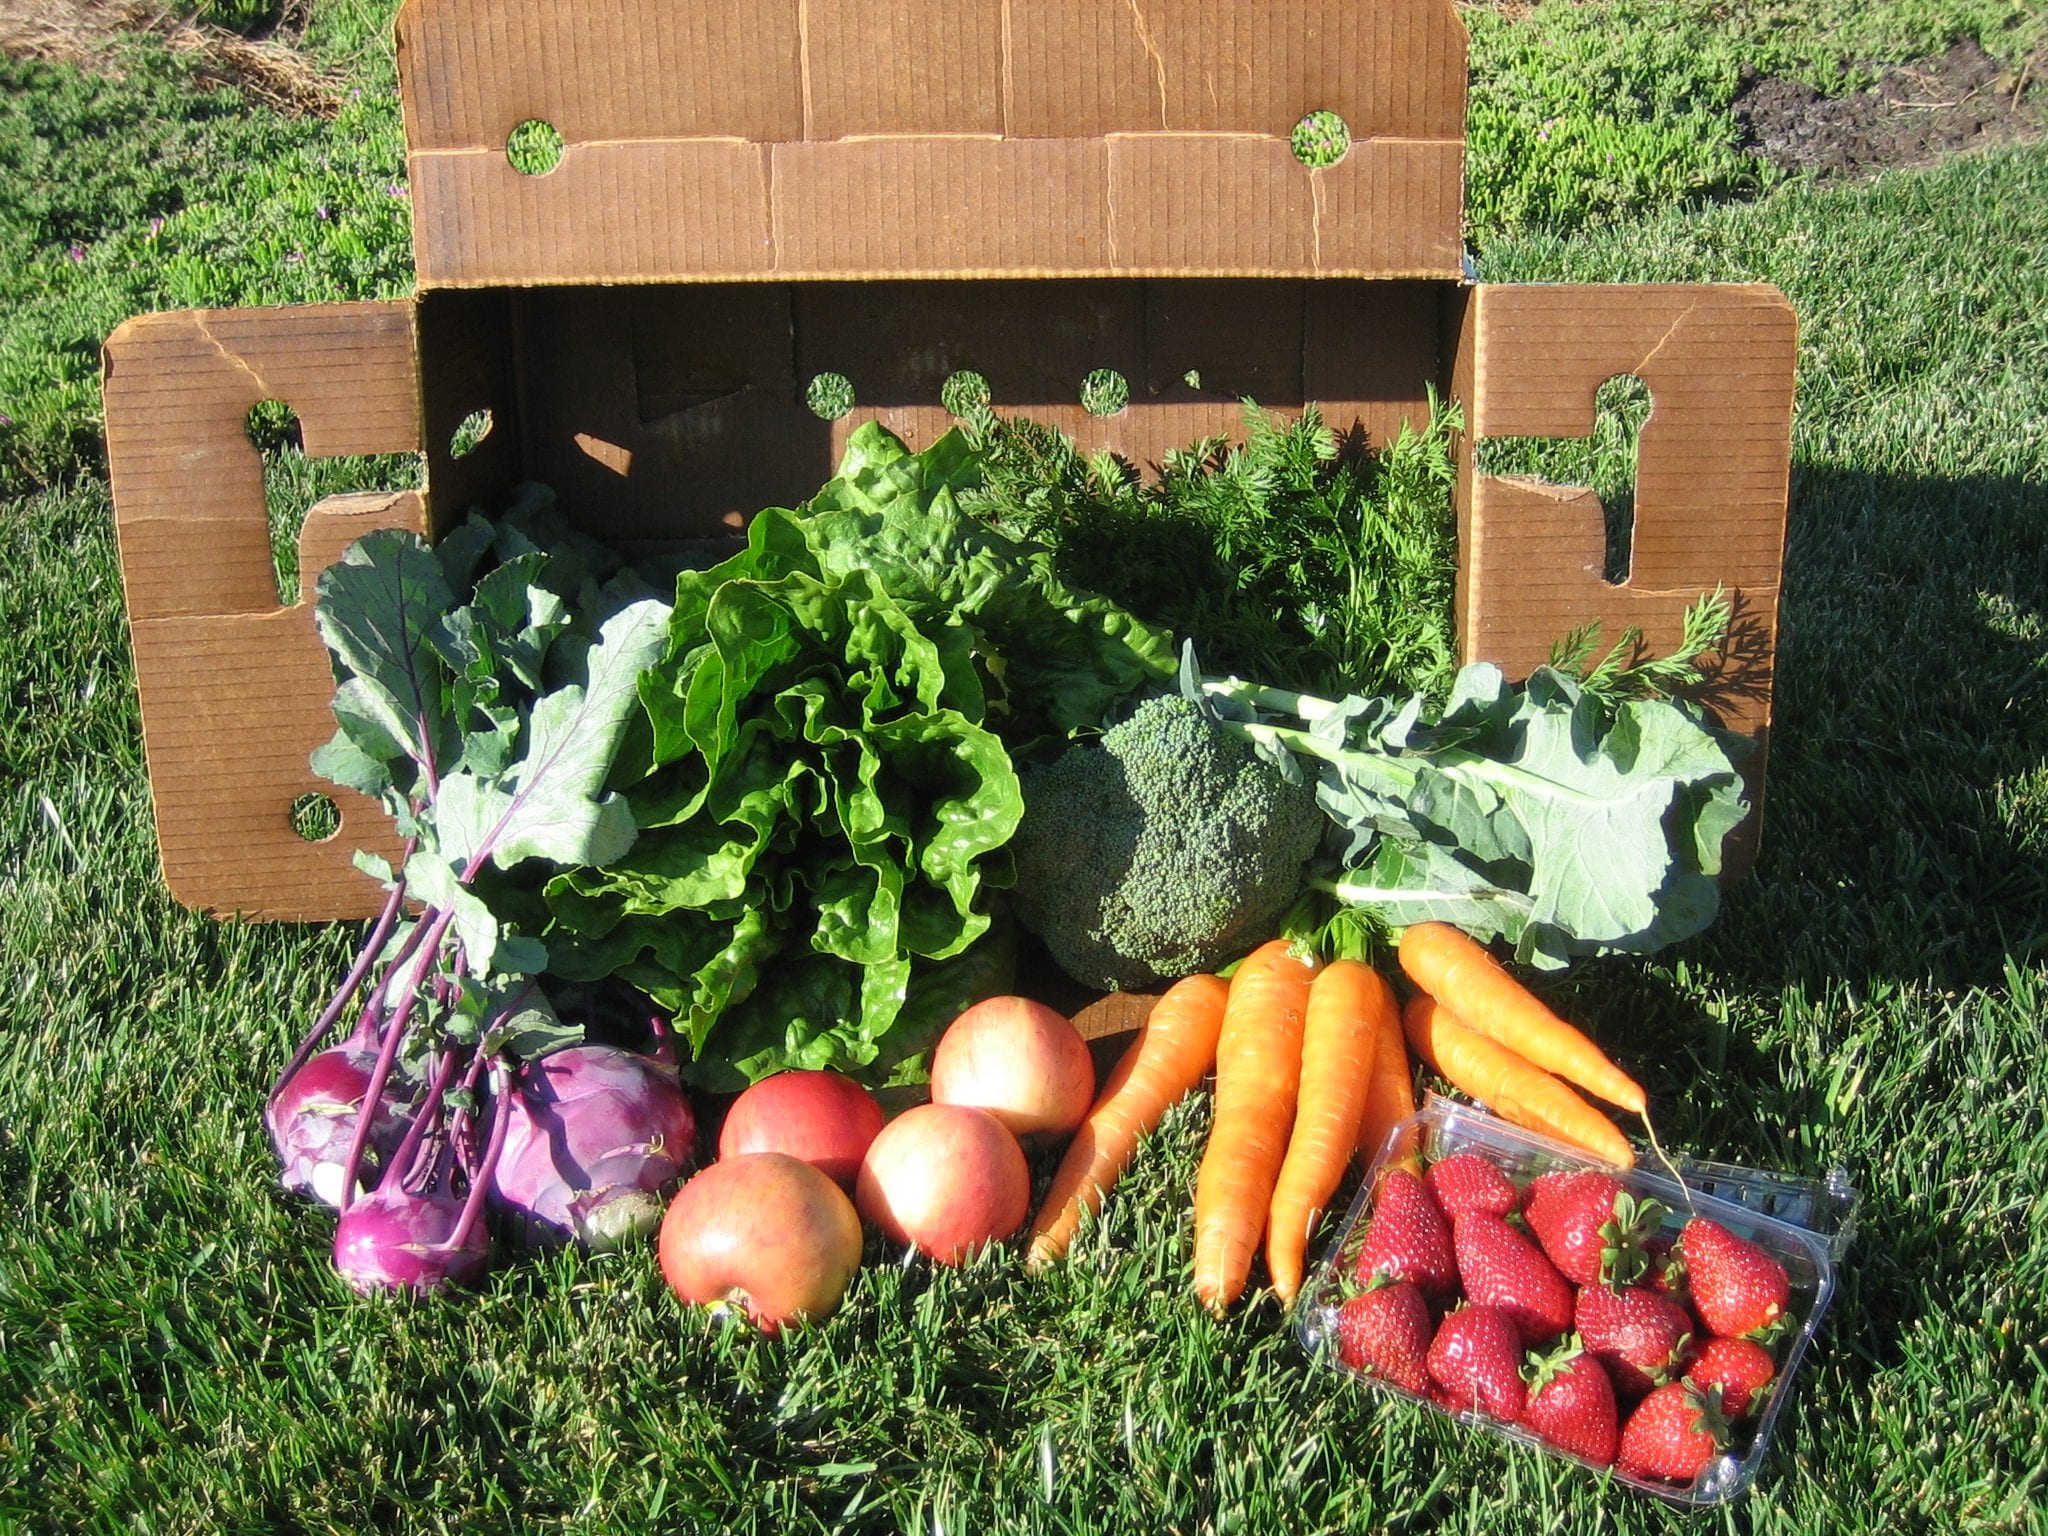 growing your own vs shopping fresh produce in a bow: turnips, lettuce, carrots, strawberries, apples, broccoli, cilantro